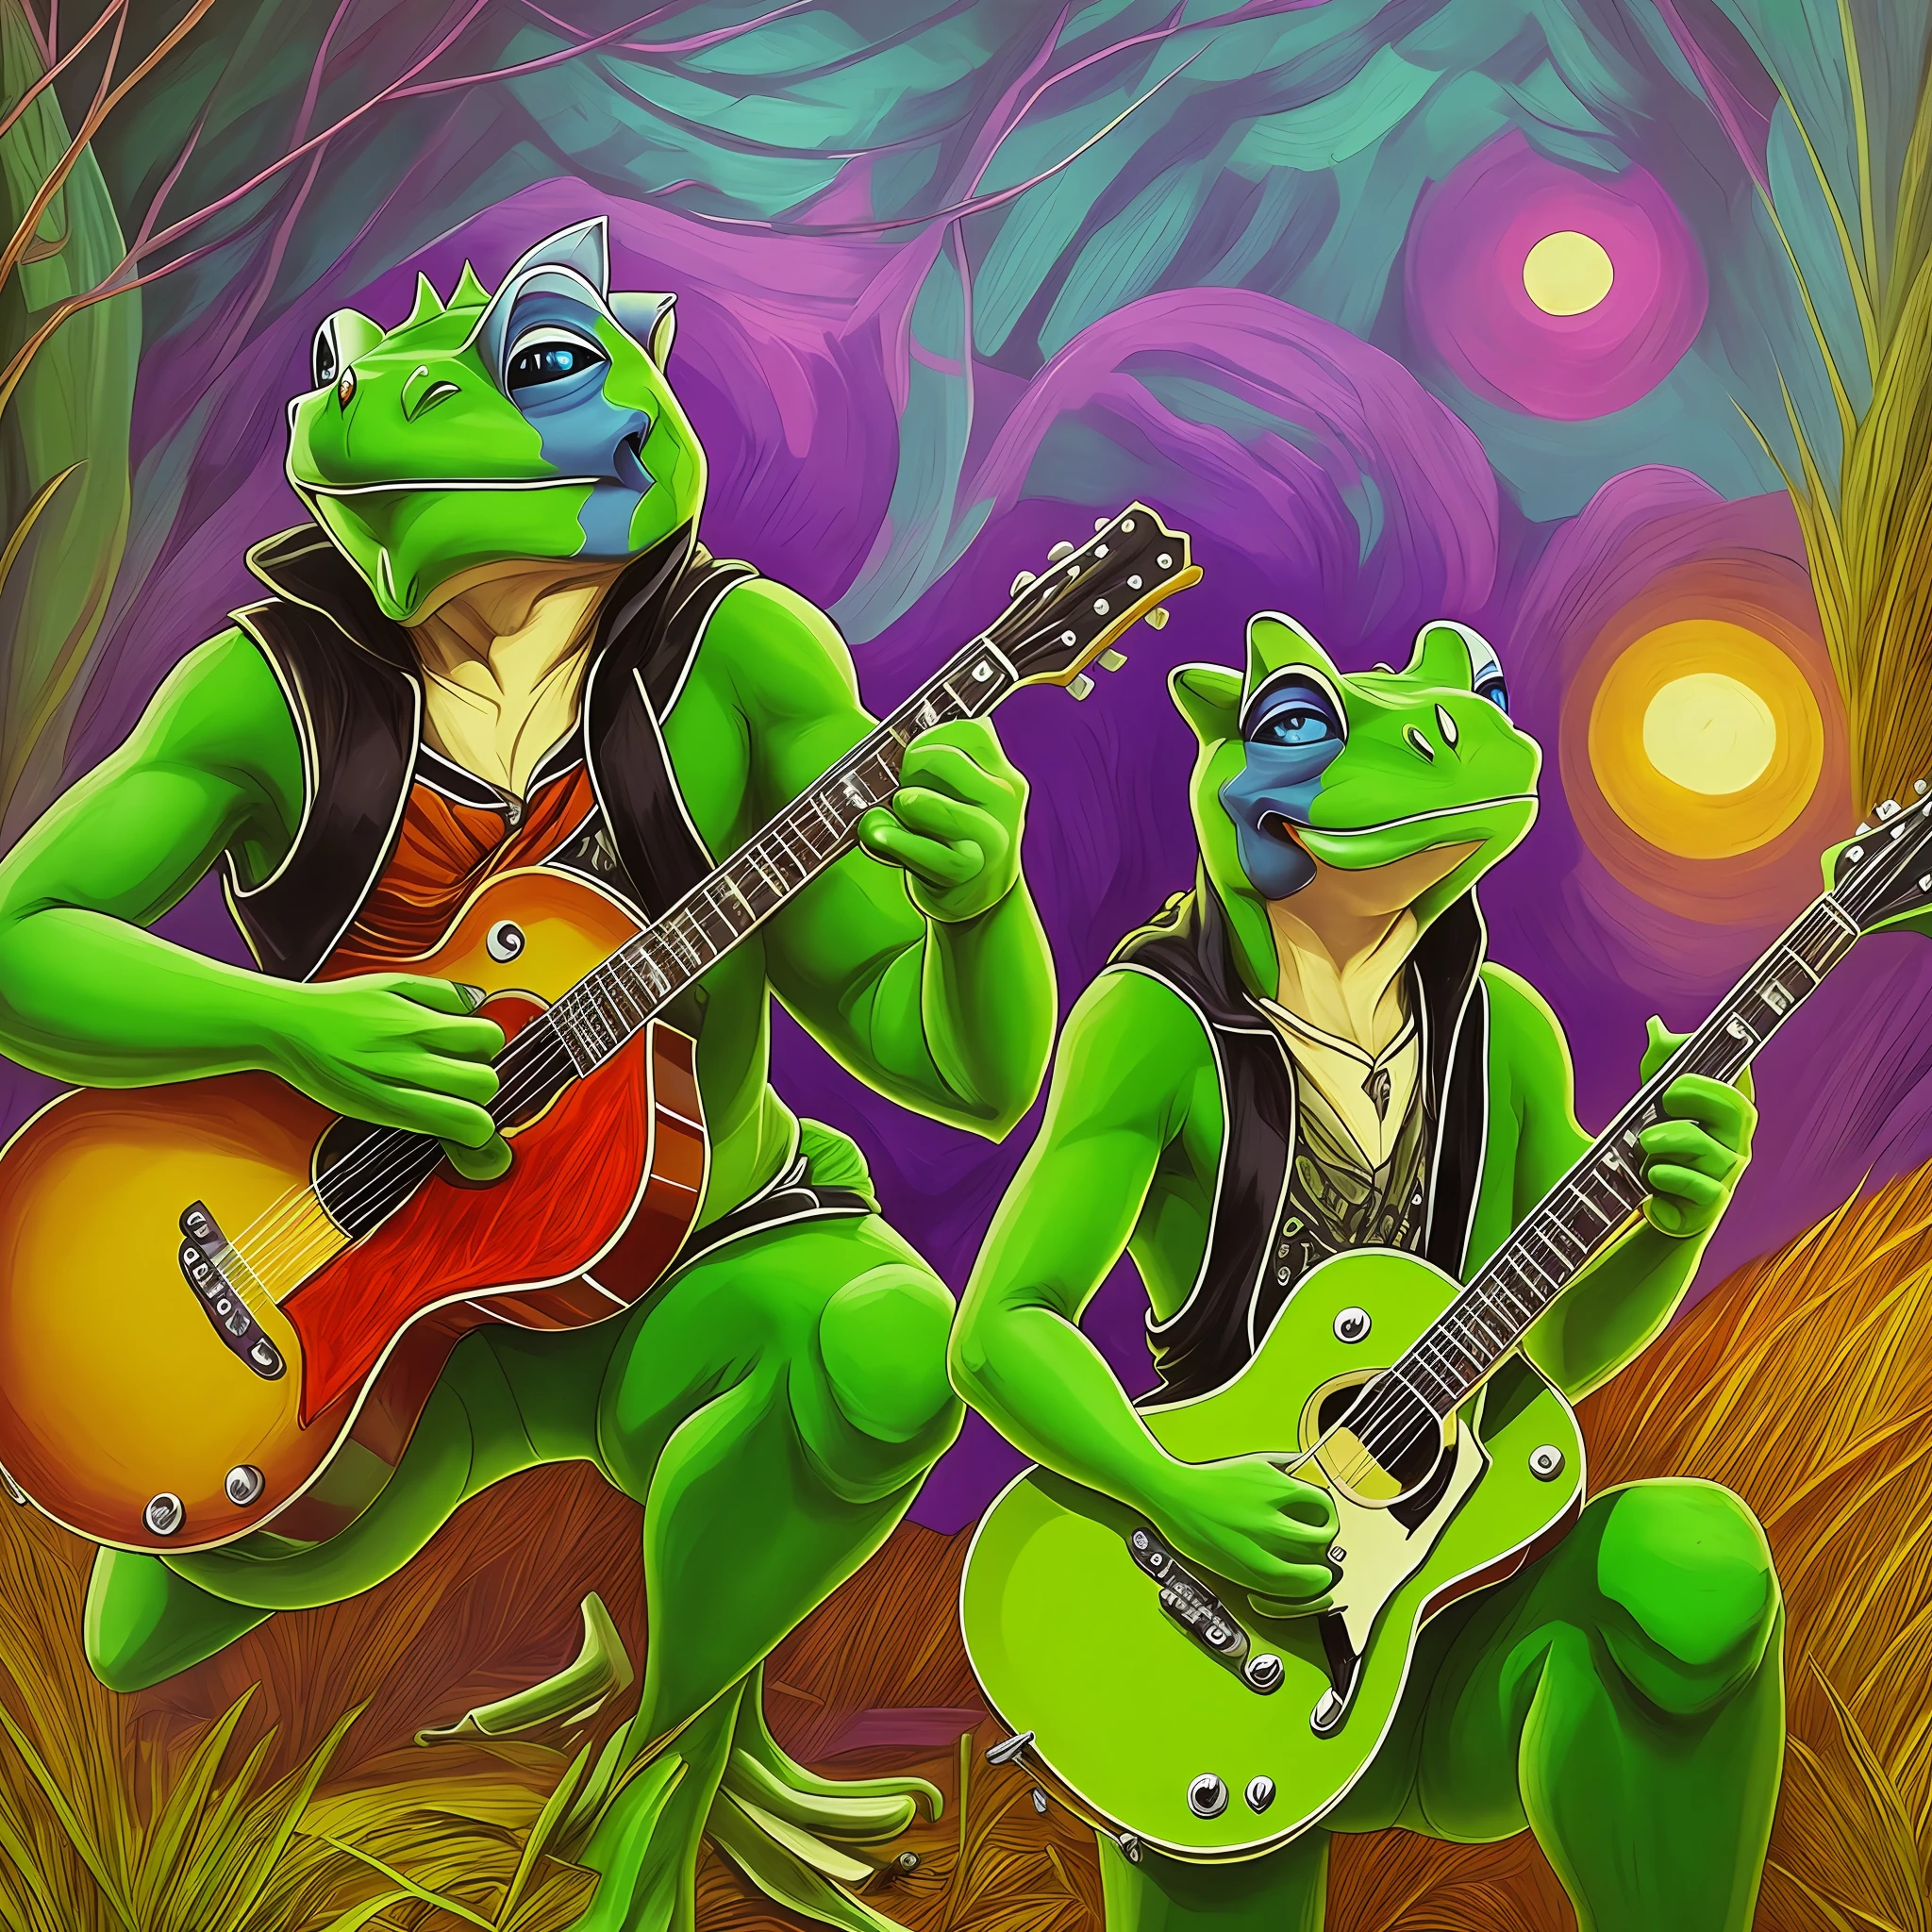 One frog playing guitar, another frog singing, another frog on